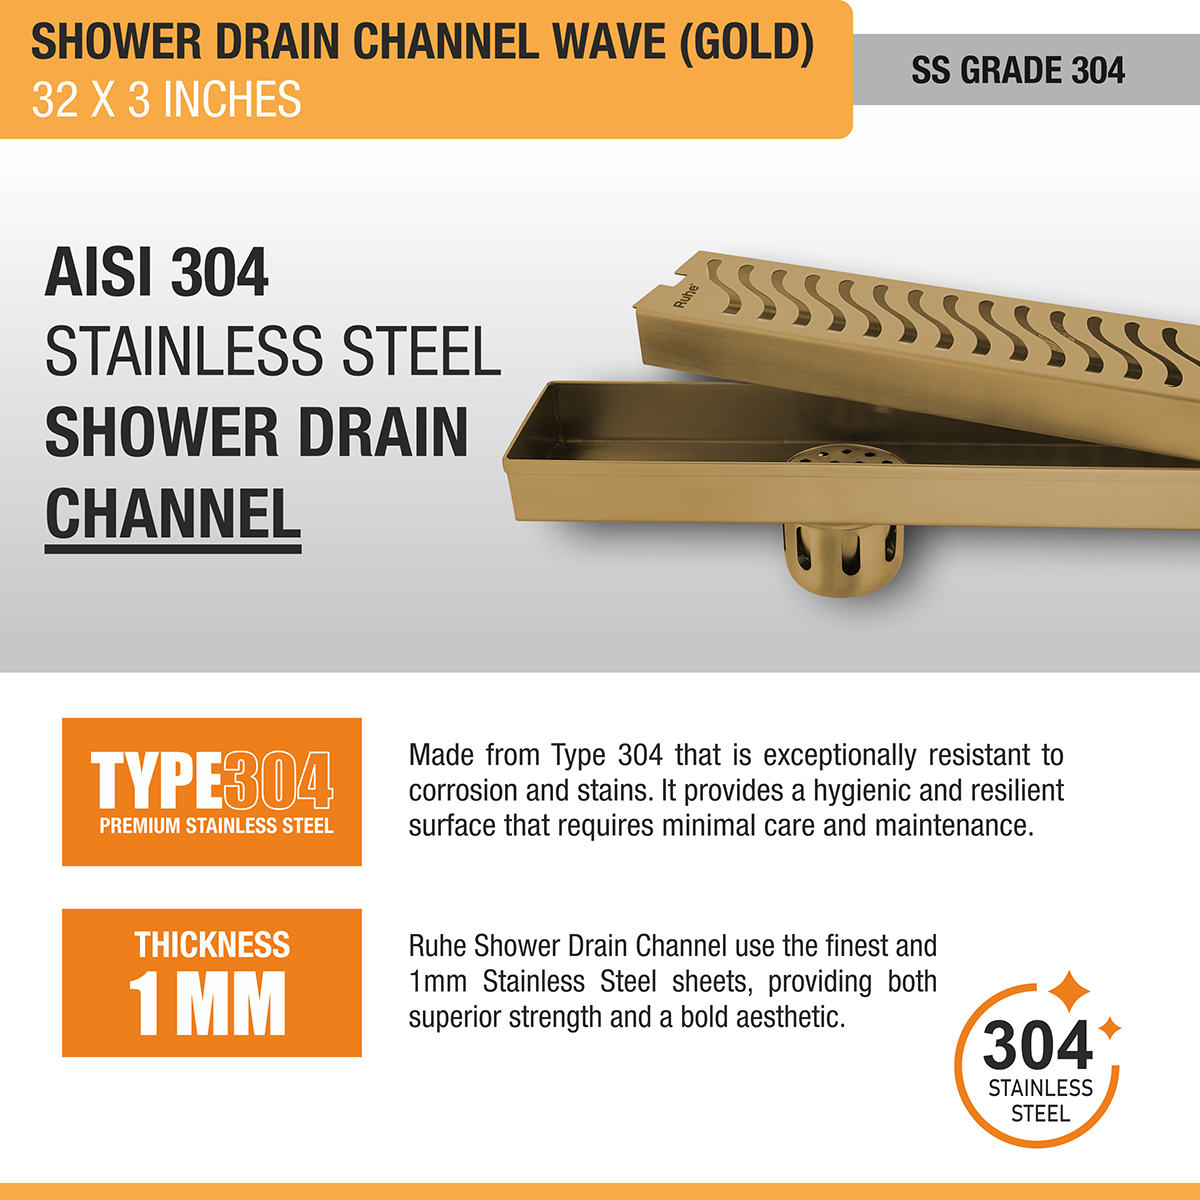 Wave Shower Drain Channel (32 x 3 Inches) YELLOW GOLD stainless steel